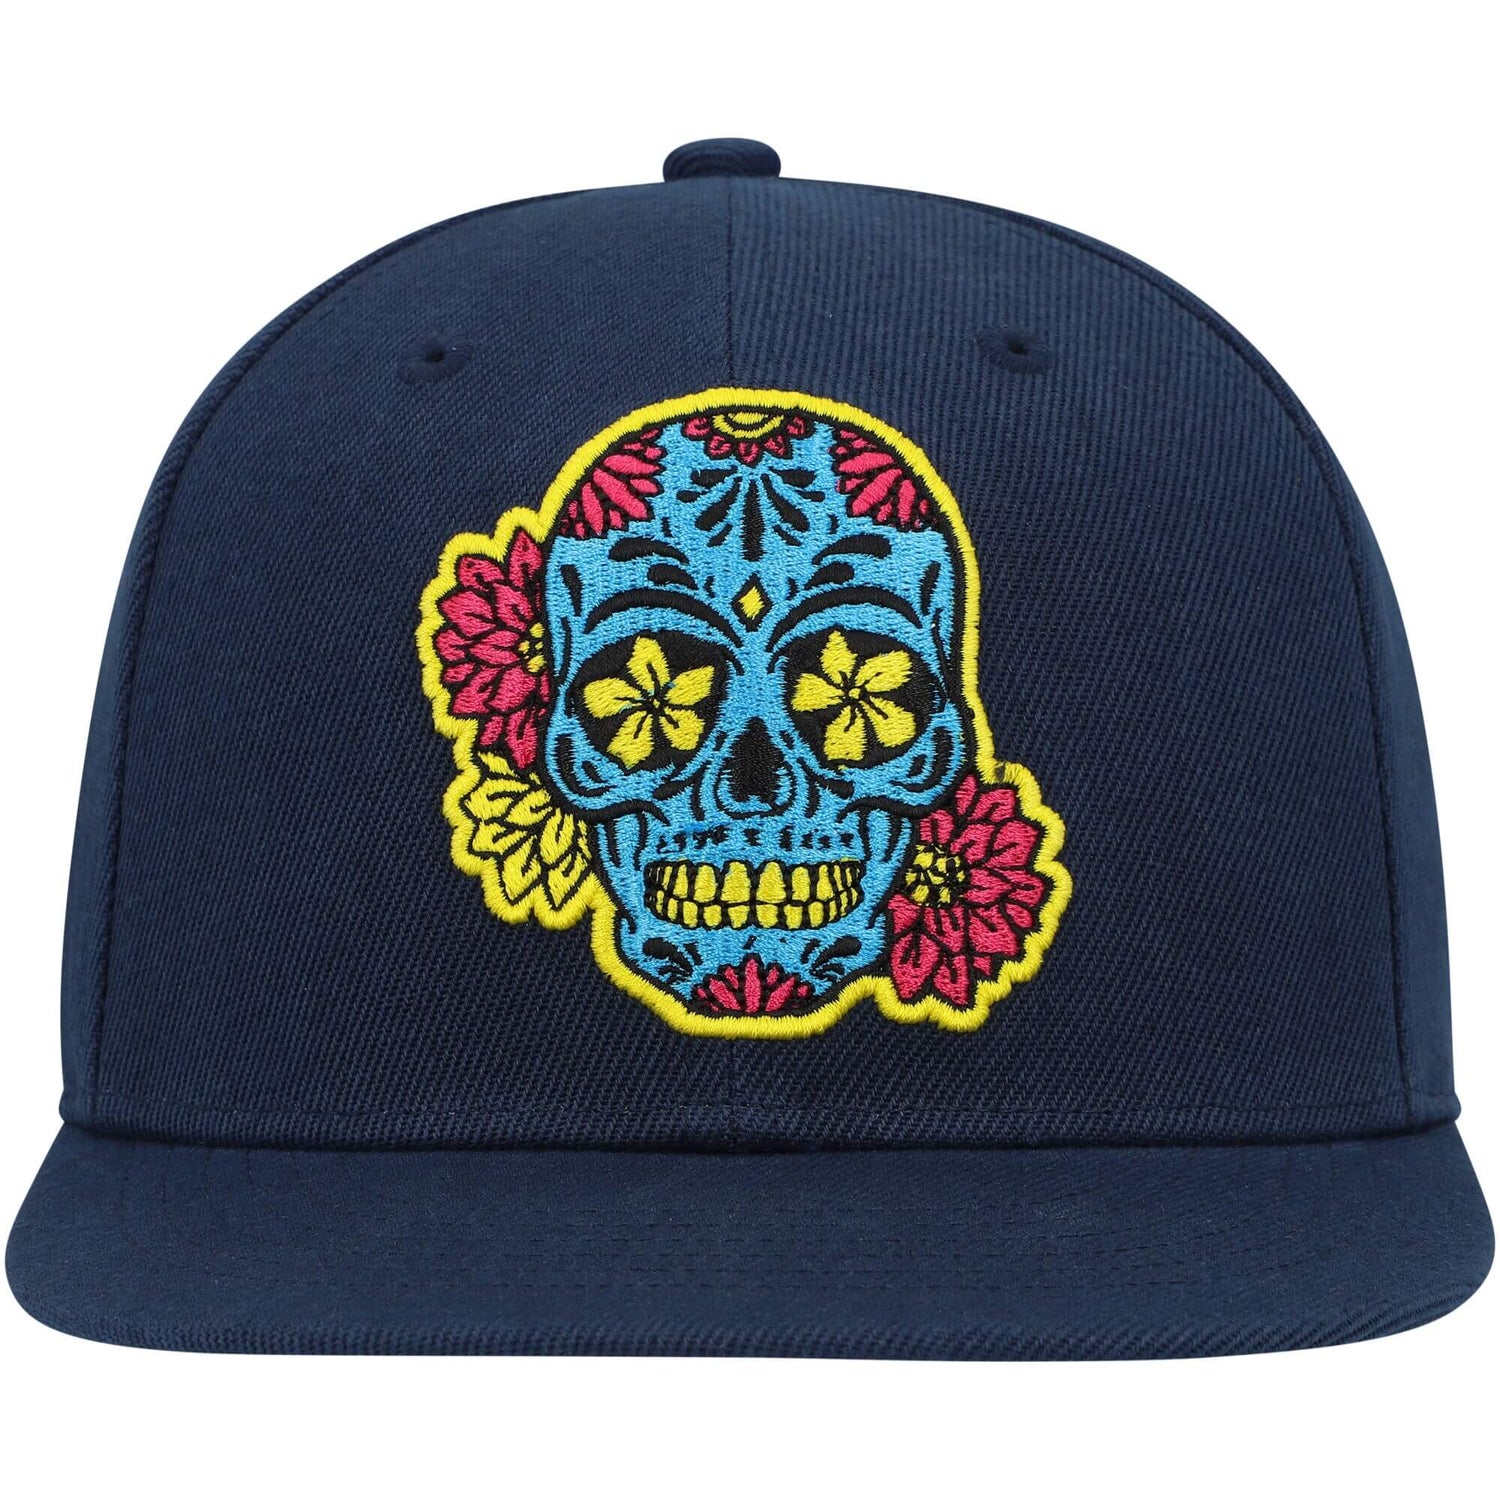 FI Collection Club America Day of the Dead Skull Snapback Hat - Navy-Blue (Front)